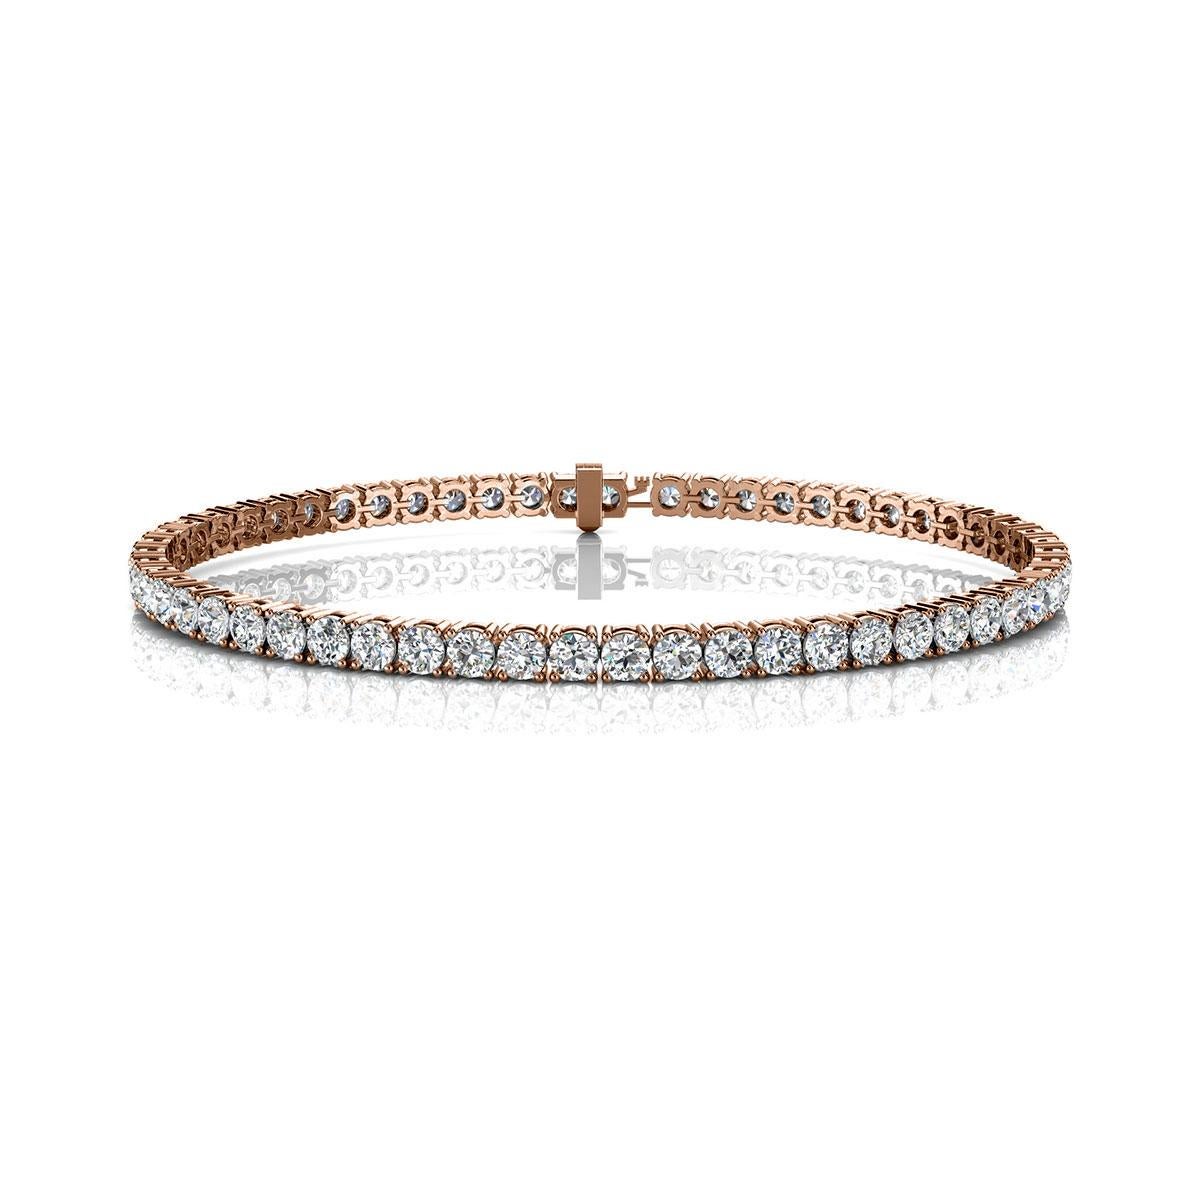 A timeless four prongs diamonds tennis bracelet. Experience the Difference!

Product details: 

Center Gemstone Type: NATURAL DIAMOND
Center Gemstone Color: WHITE
Center Gemstone Shape: ROUND
Center Diamond Carat Weight: 5
Metal: 18K Rose Gold
Metal